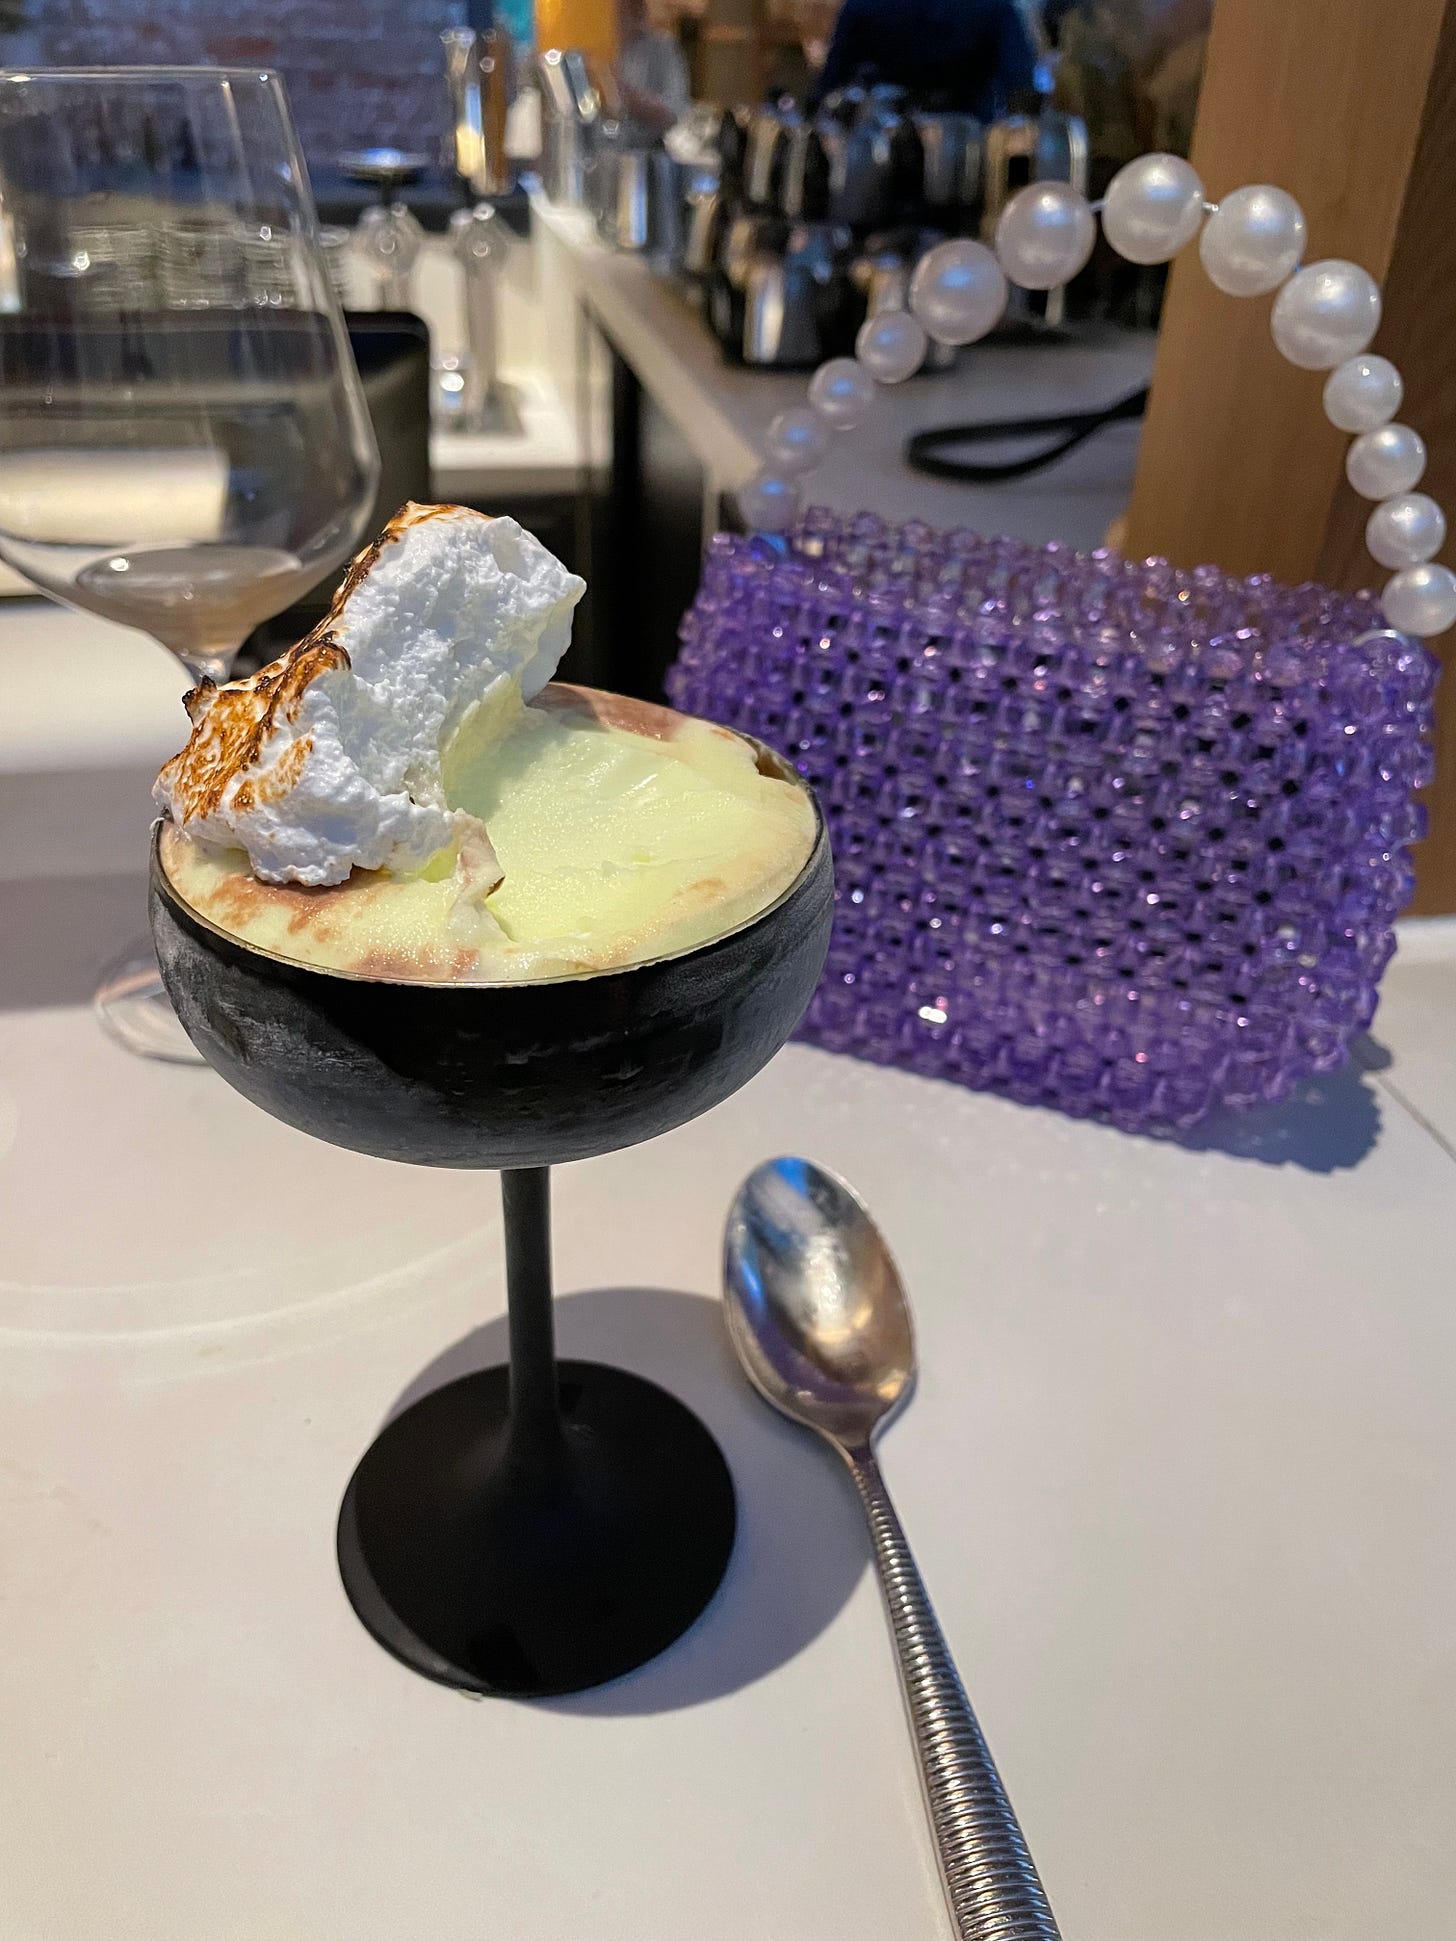 Lime sorbet in a couple with marshmallow on top, a purple handbag in the background